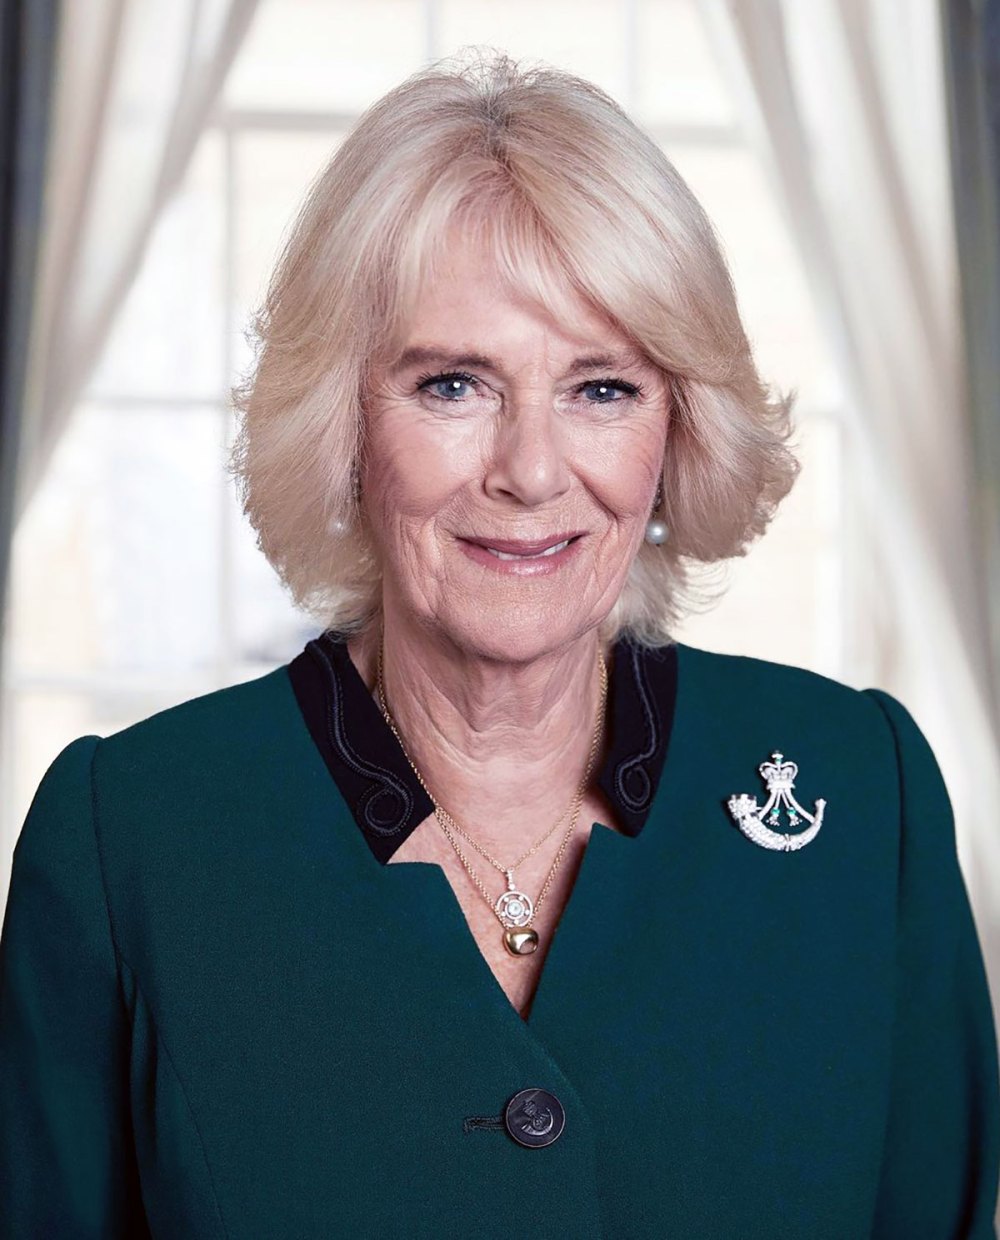 The Meaning Behind Duchess Camilla's Brooch in Her Newest Portrait